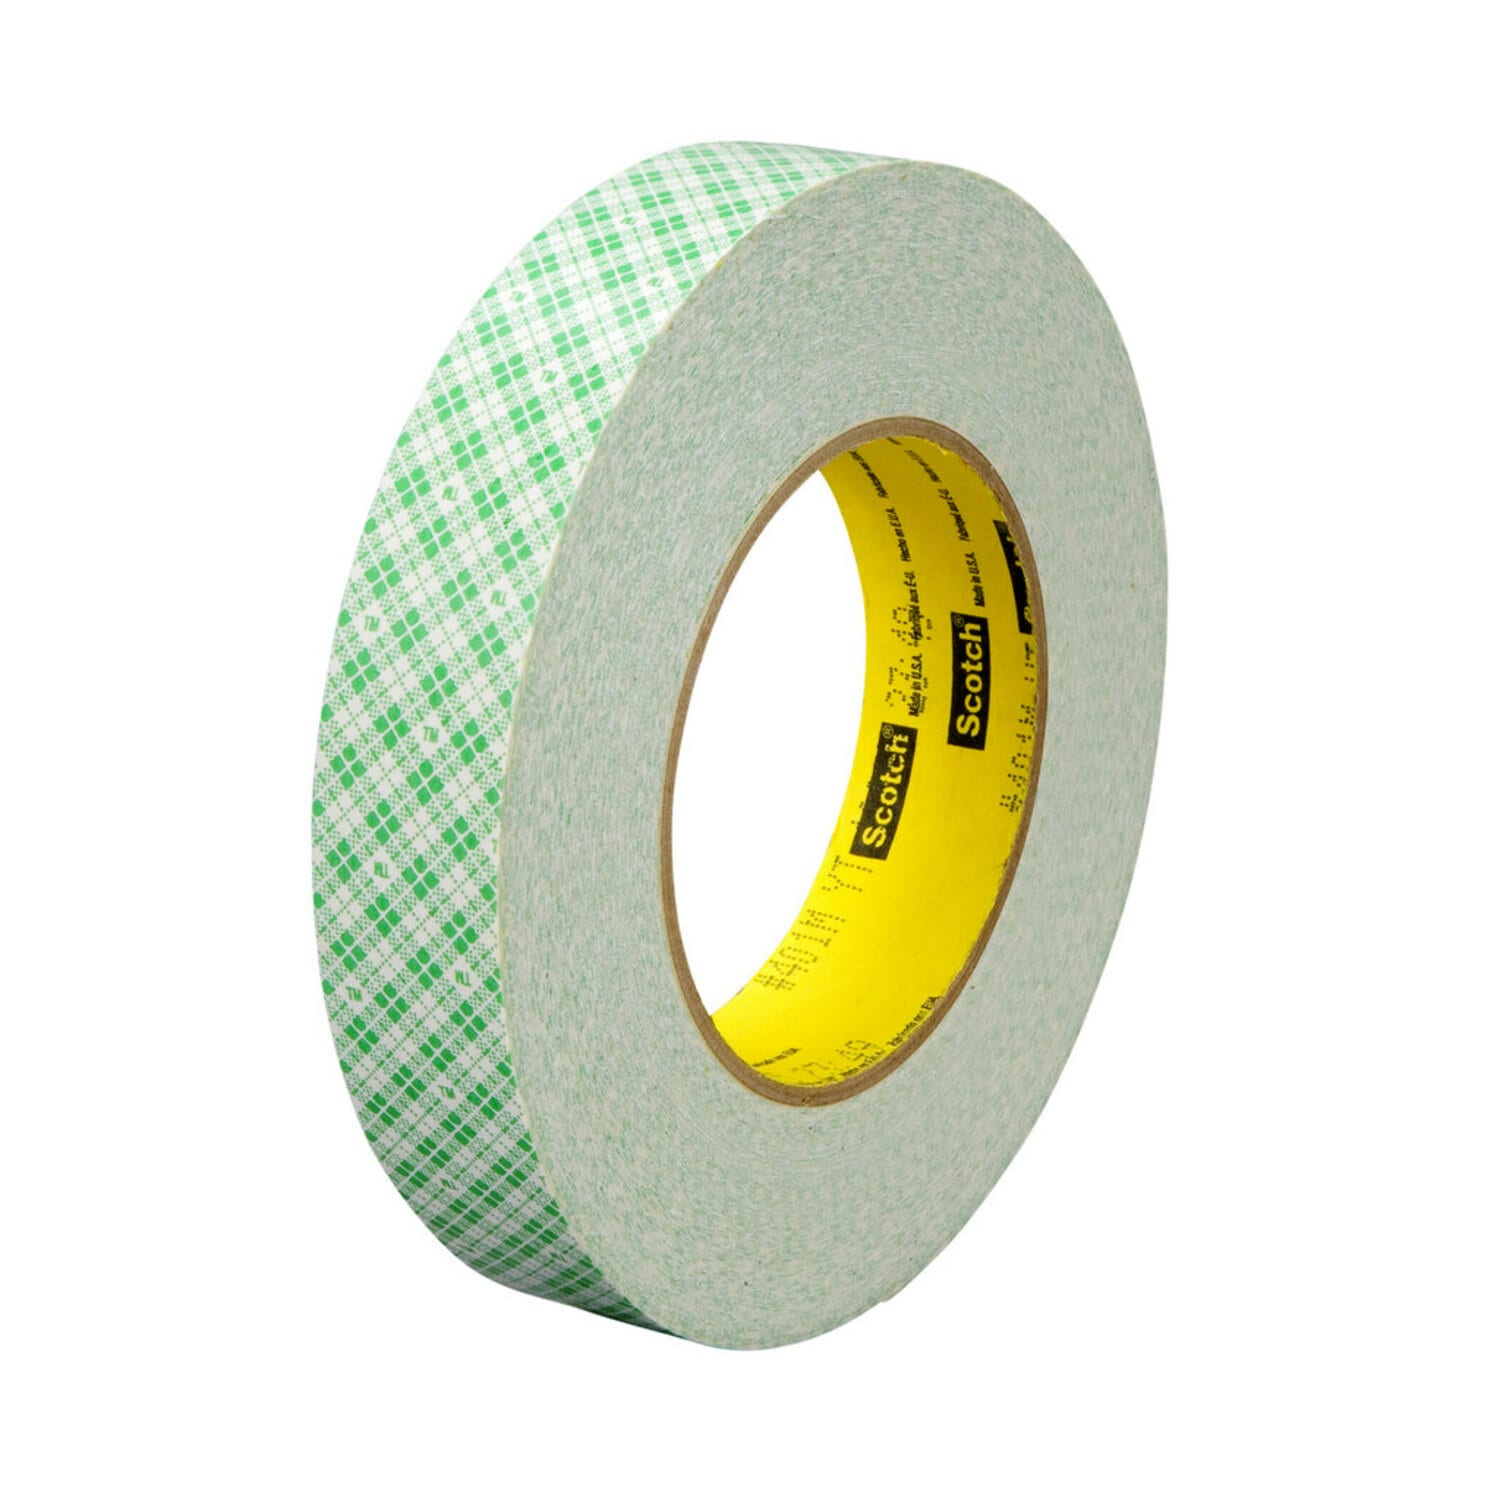 7100013479 - 3M Double Coated Paper Tape 401M, Natural, 9 mil, Roll, Config